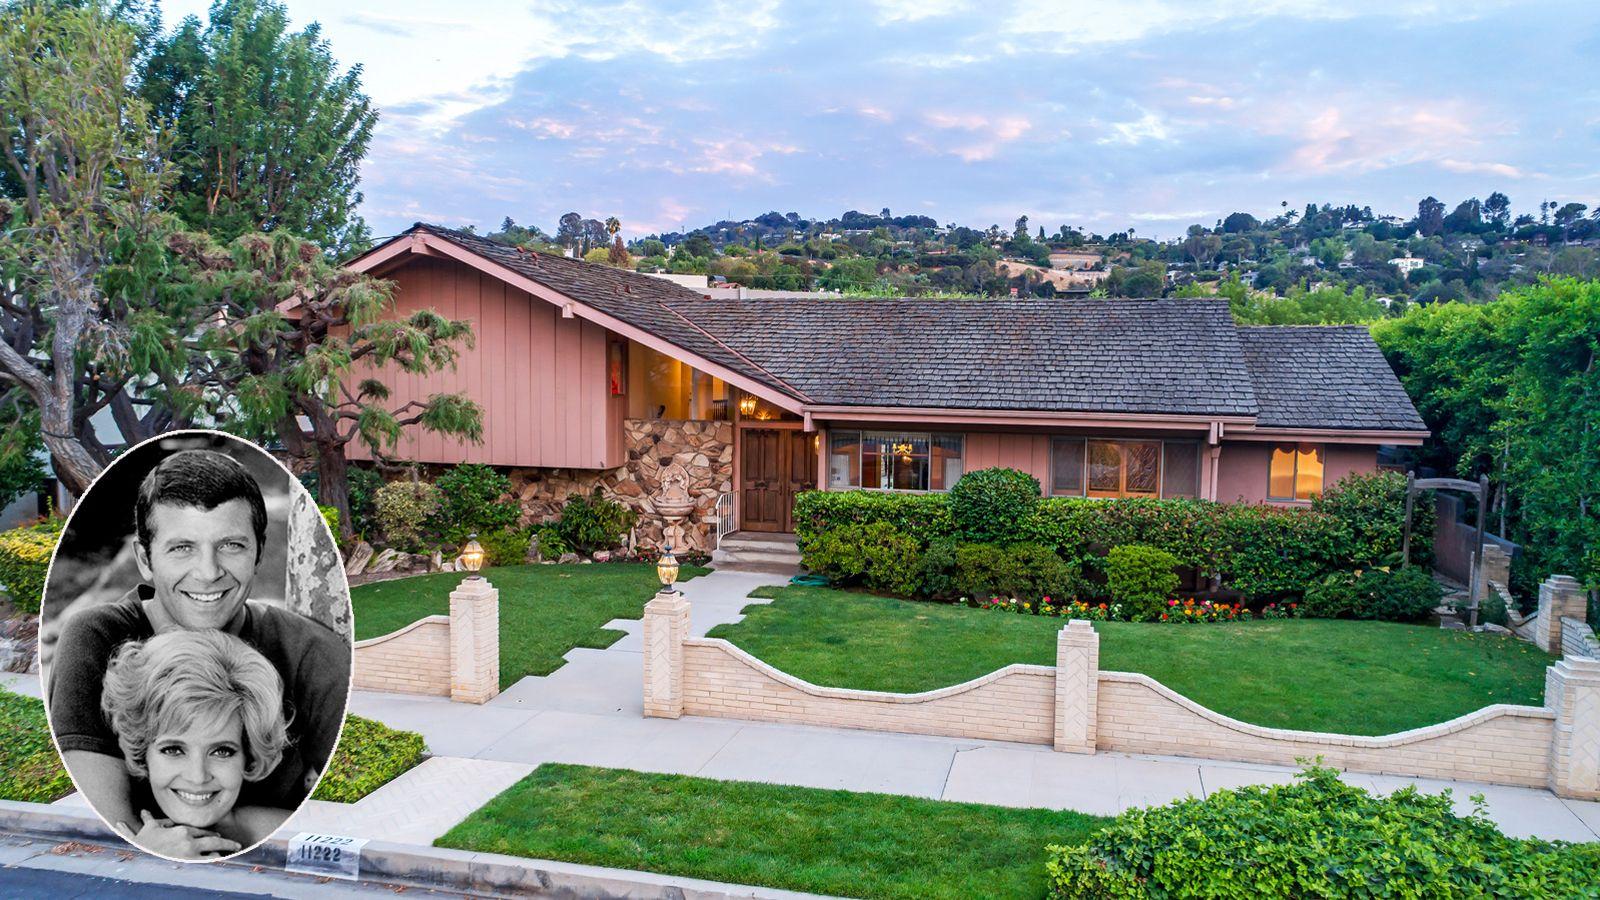 Lance Bass says he's 'heartbroken' to lose the Brady Bunch house to